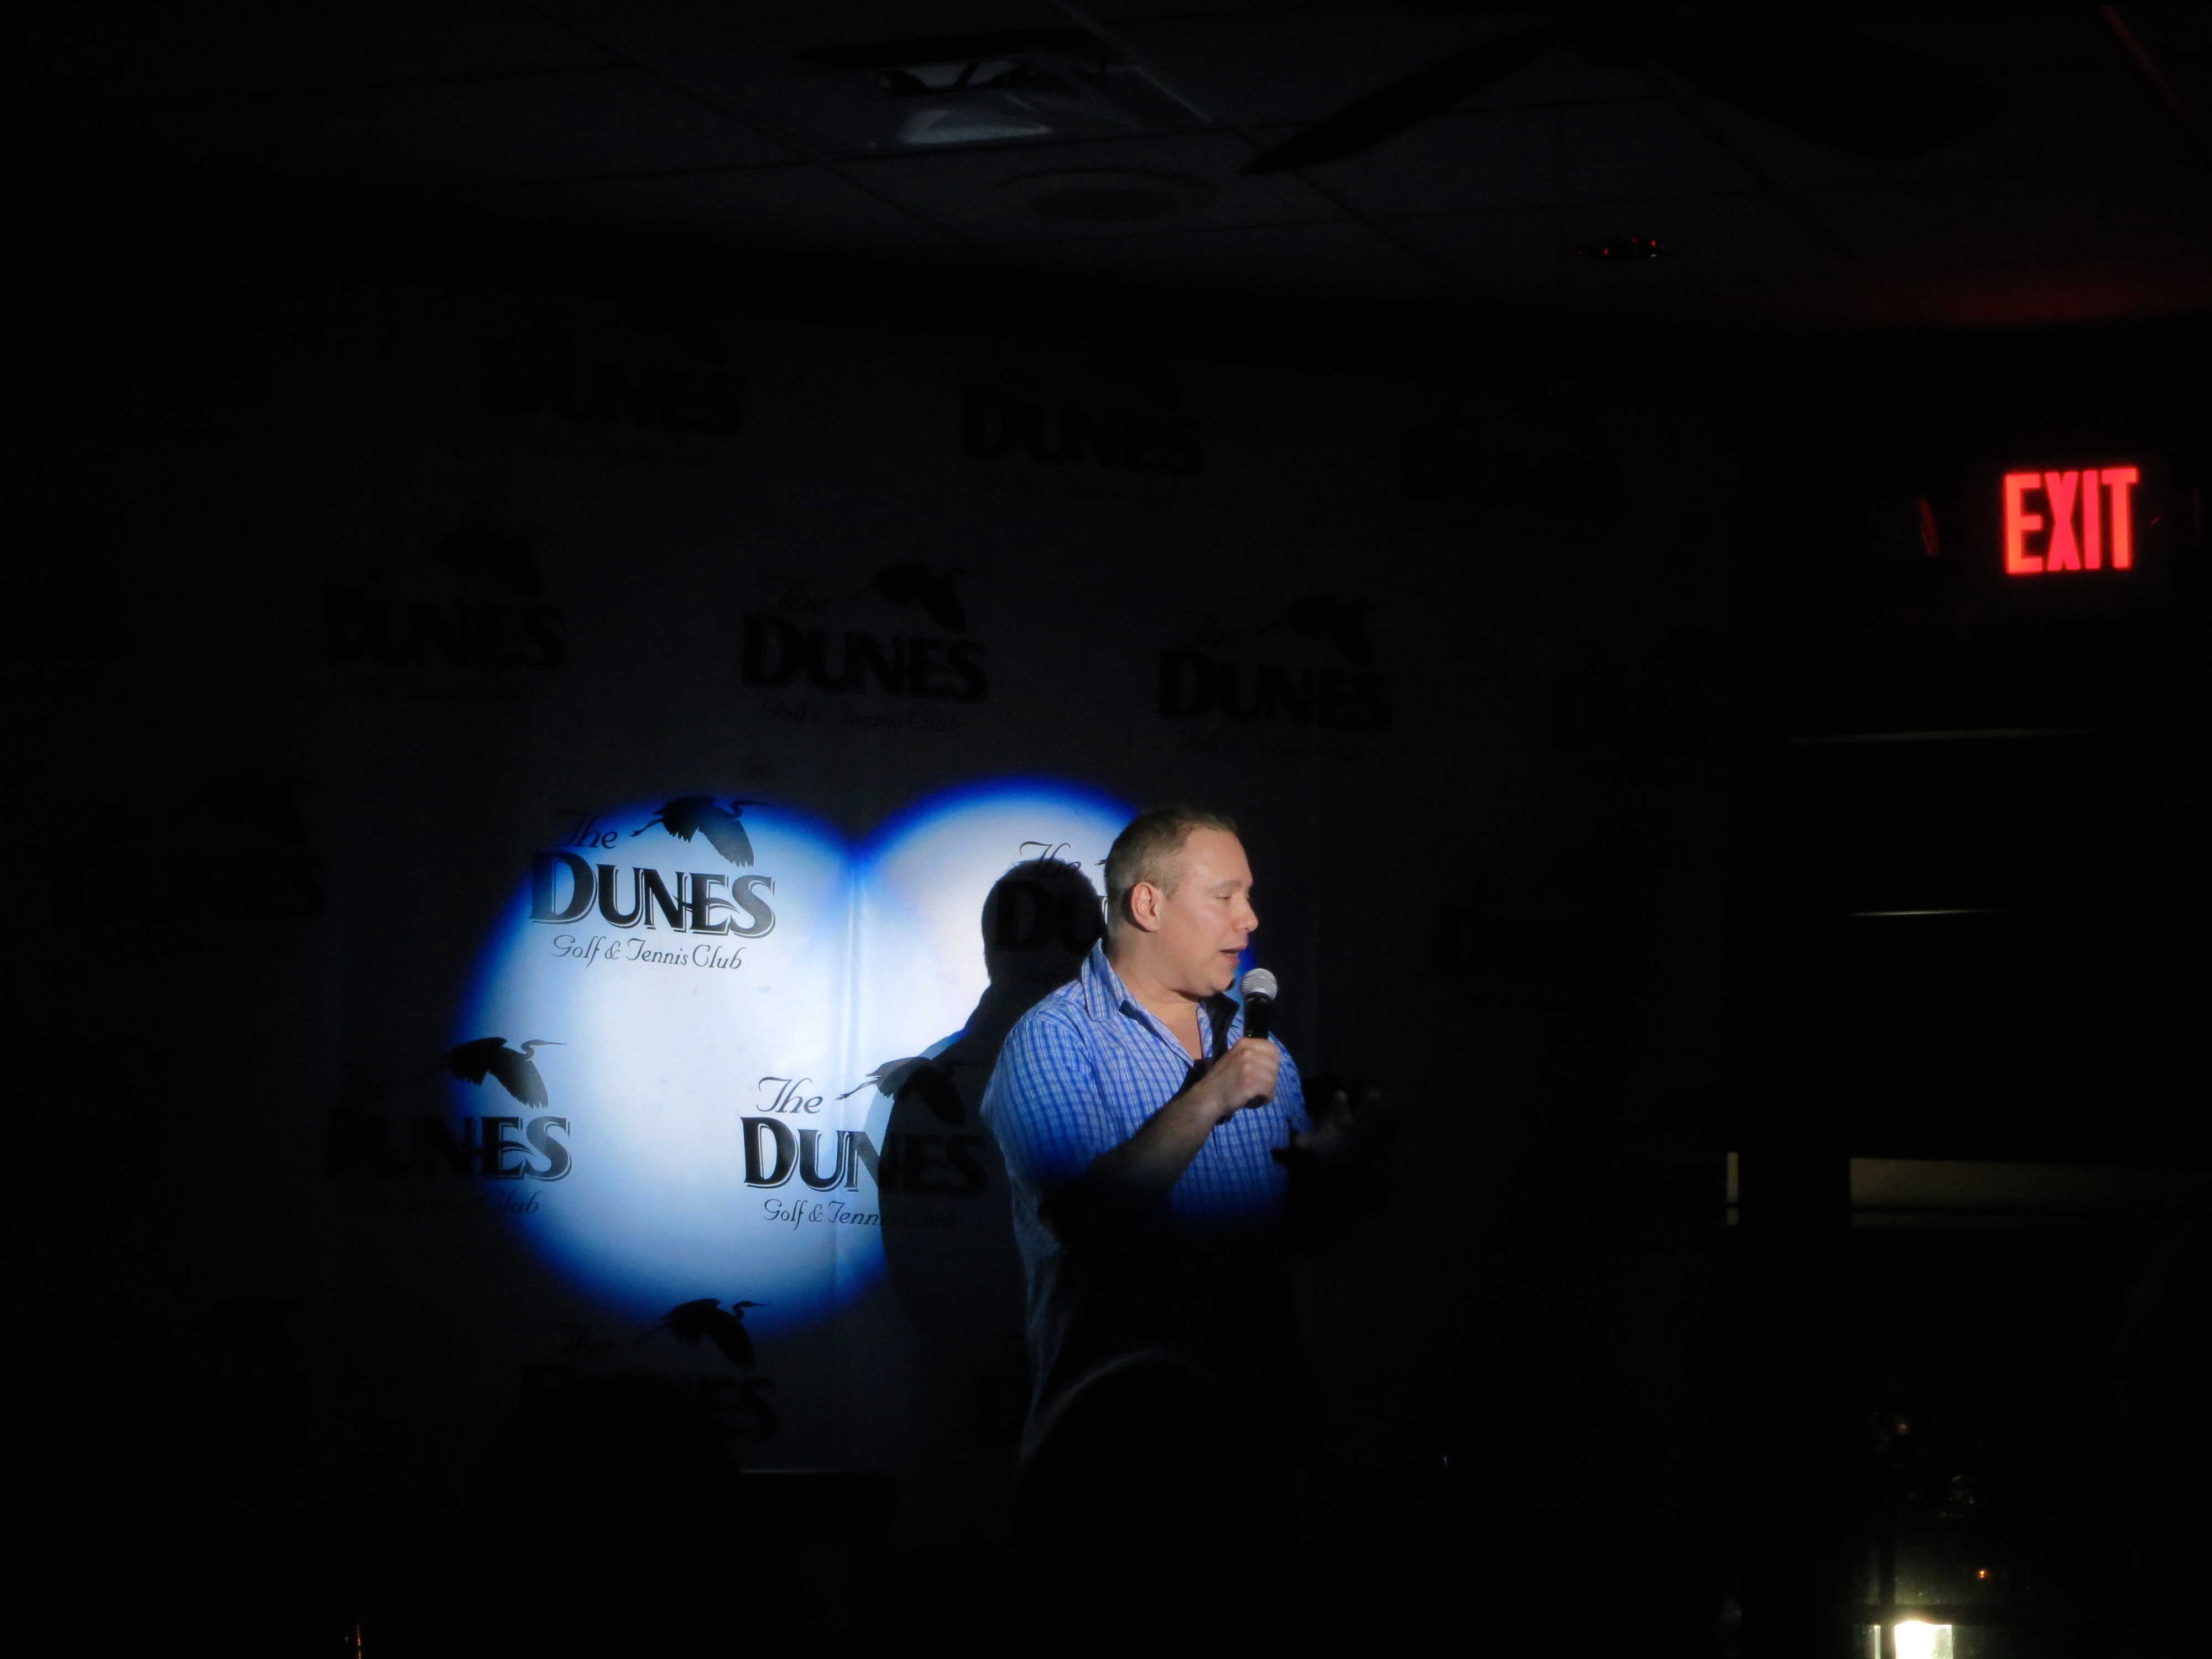 Comedy Night at The Dunes